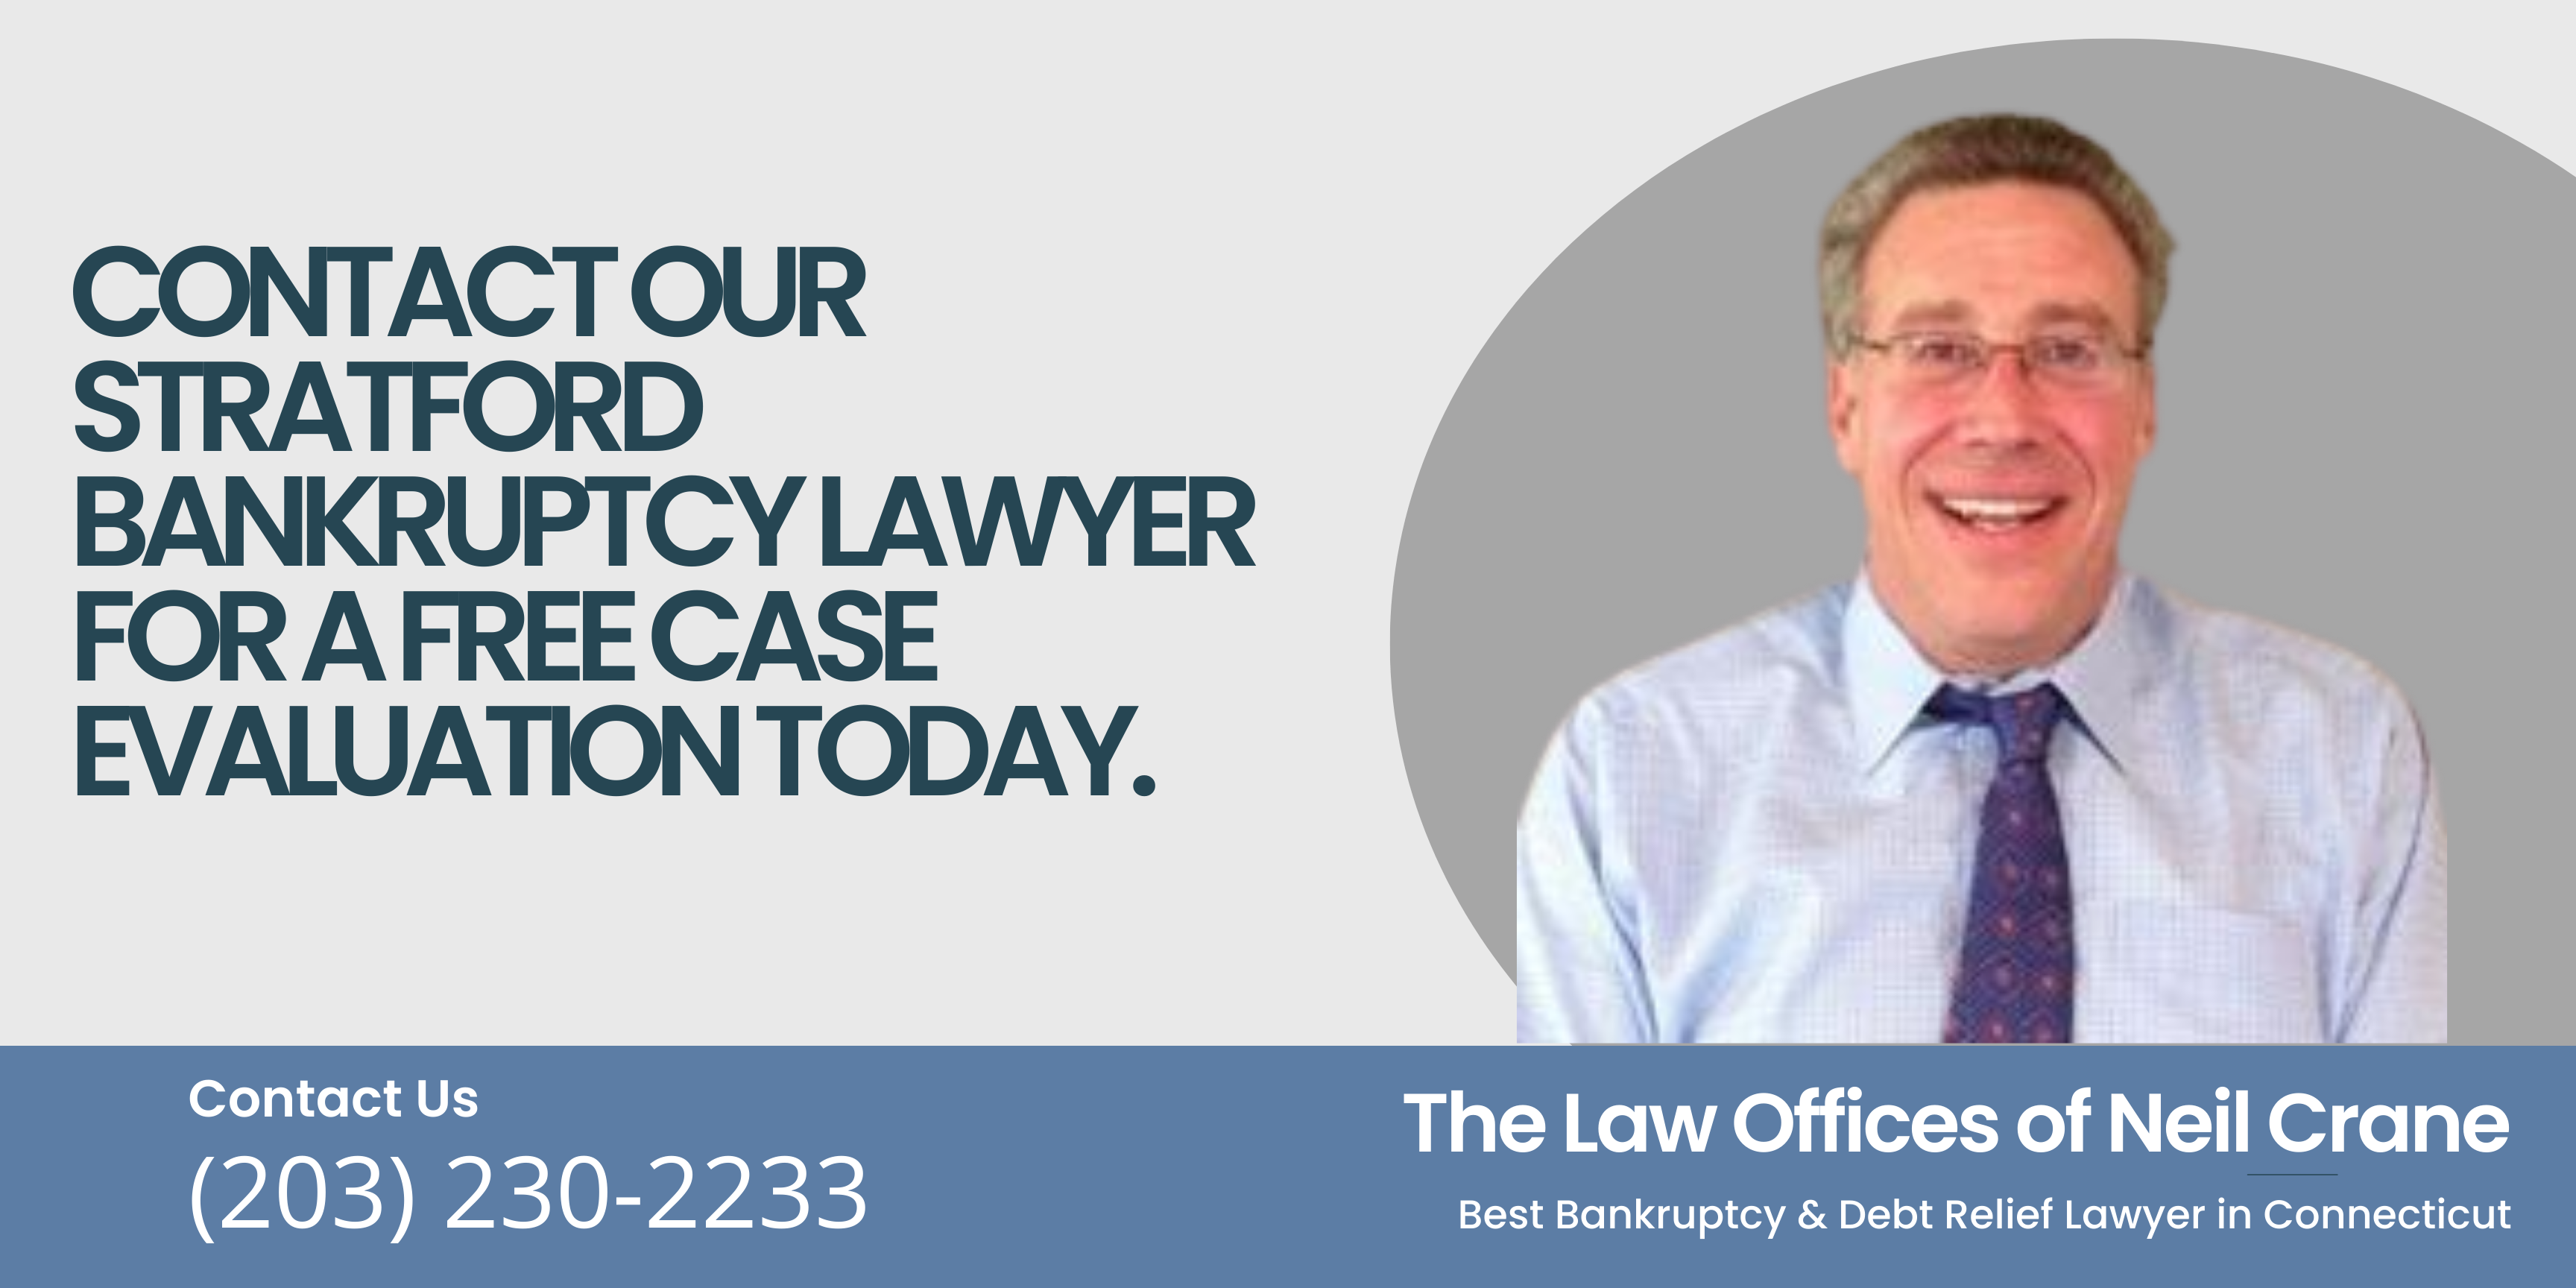 Contact our Stratford Bankruptcy Lawyer